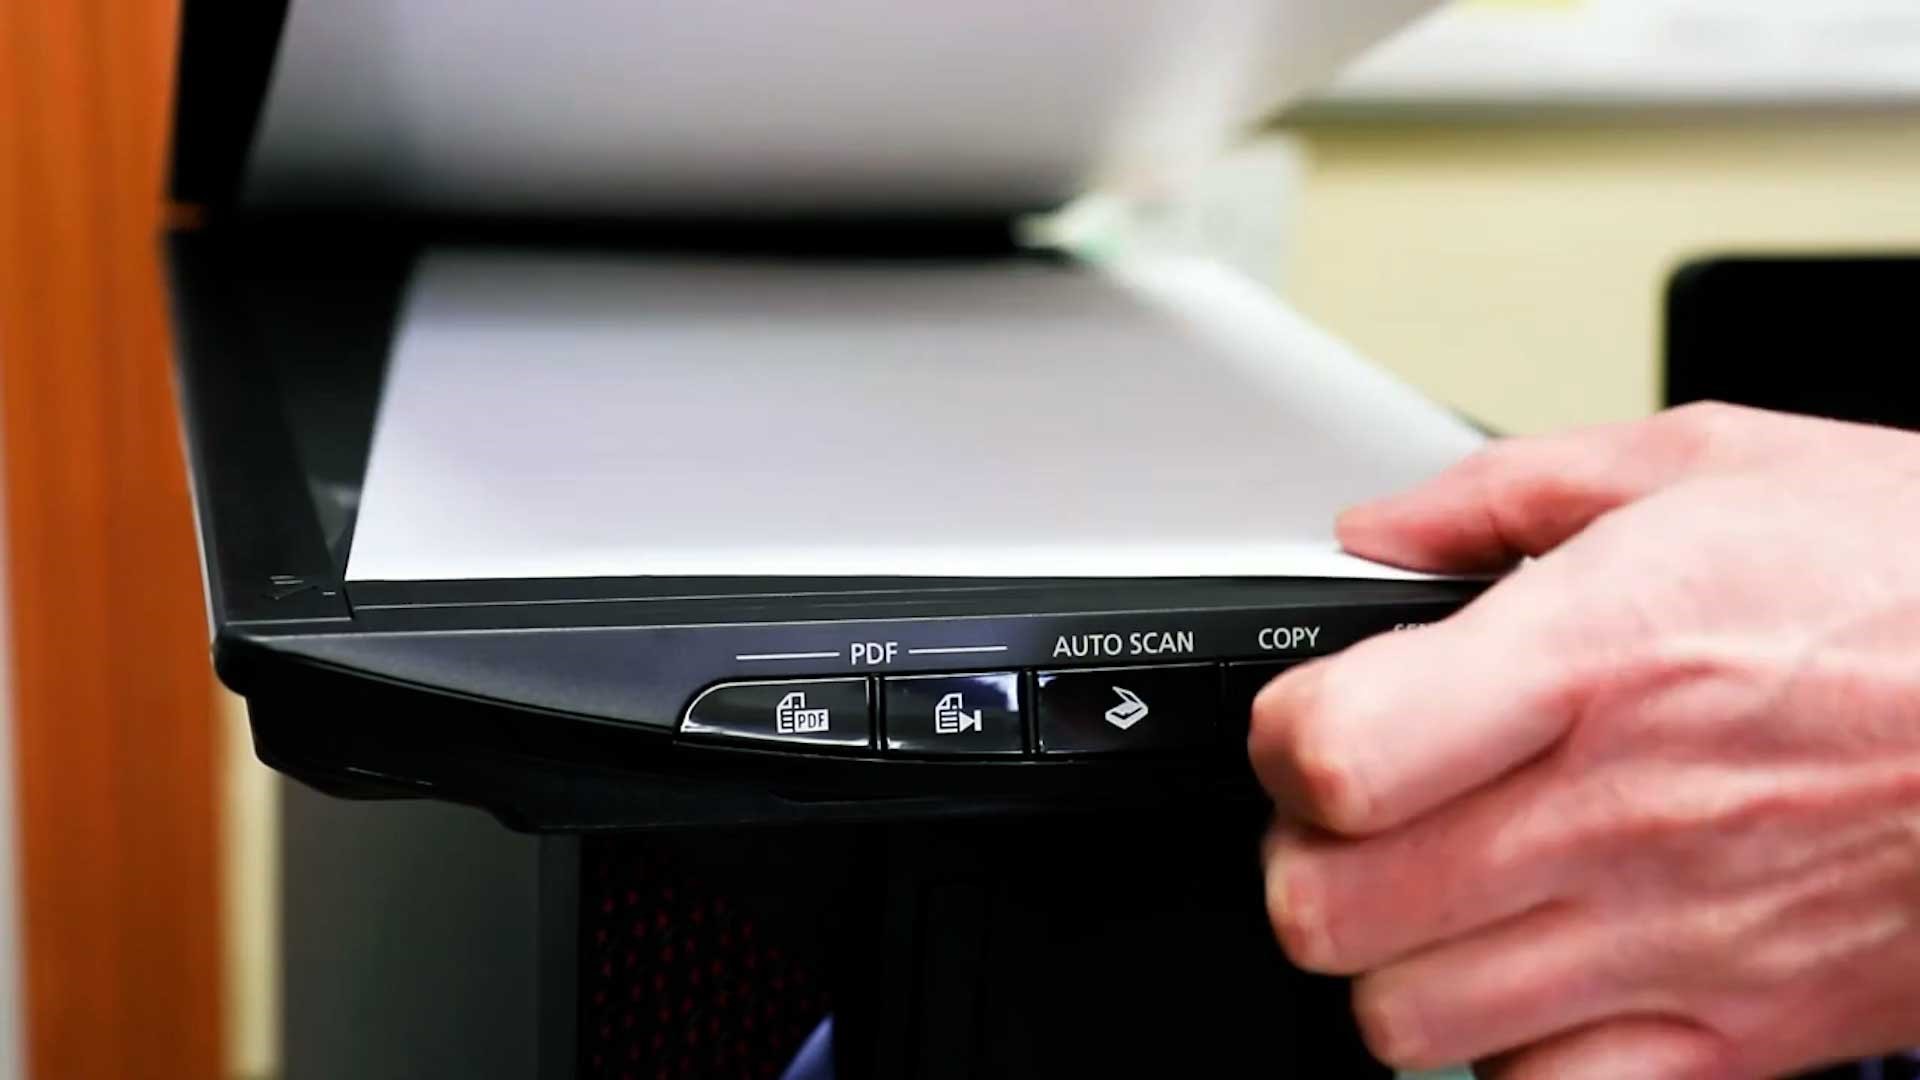 User placing a document into a scanner.